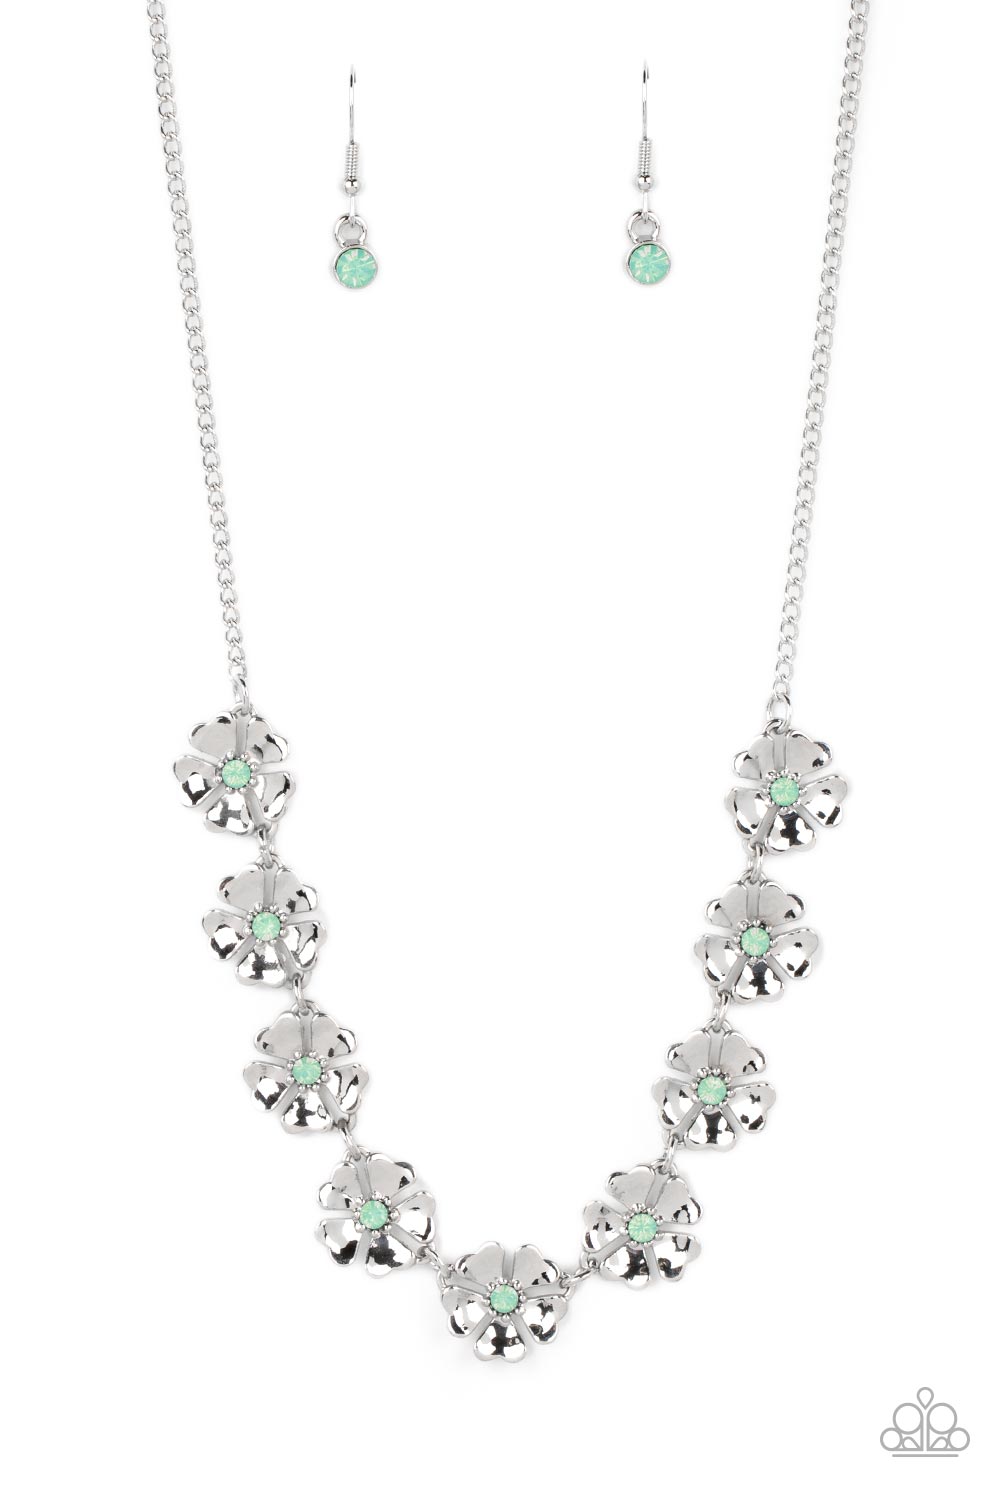 Paparazzi Necklace ~ Graciously Audacious - Green – Fun Jewelry Accessories